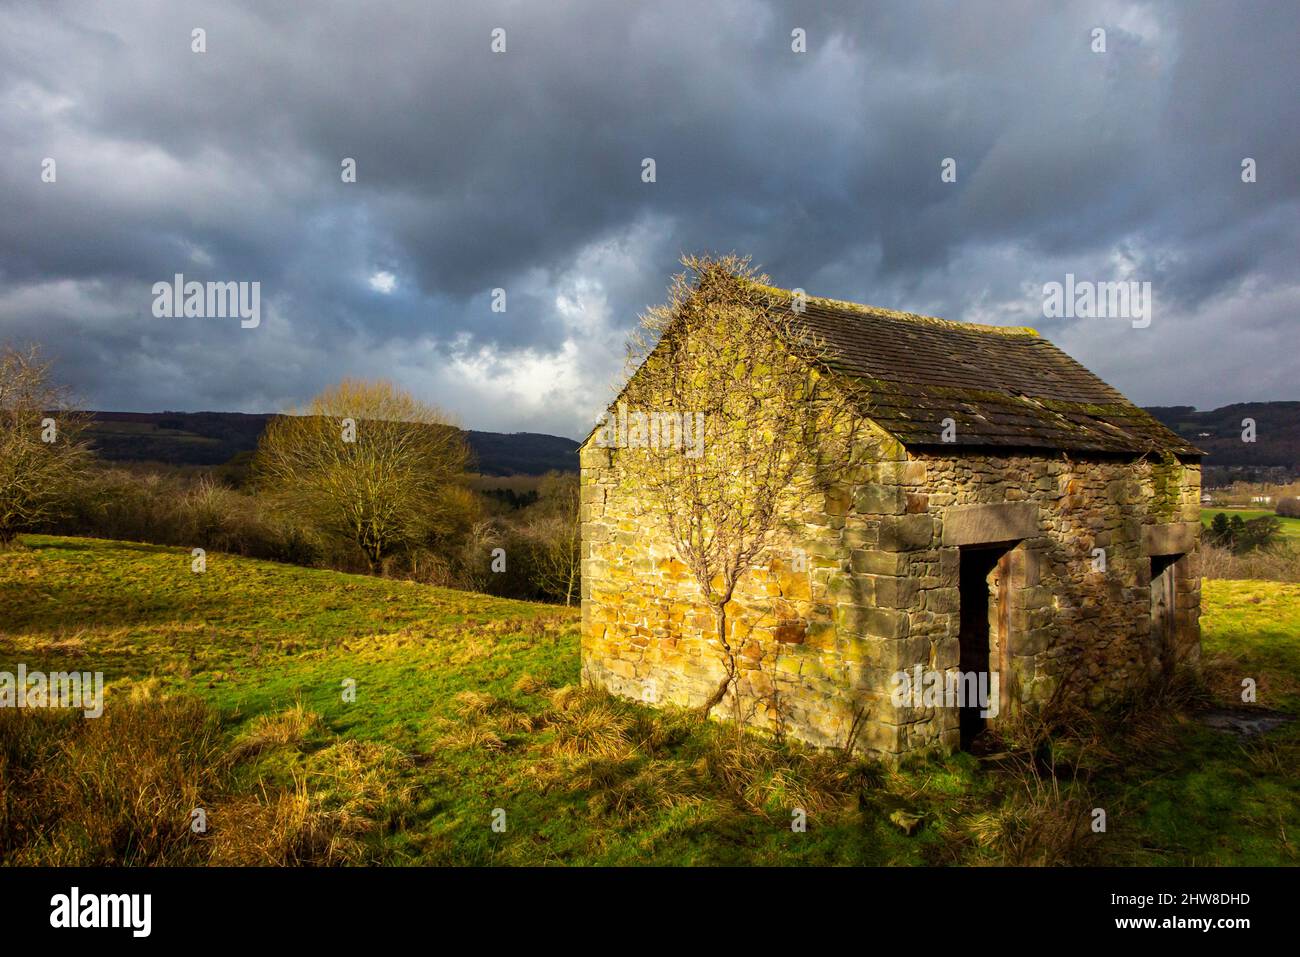 Field barn in typical Peak District landscape at Oaker near Matlock in the Derbyshire Dales England UK Stock Photo